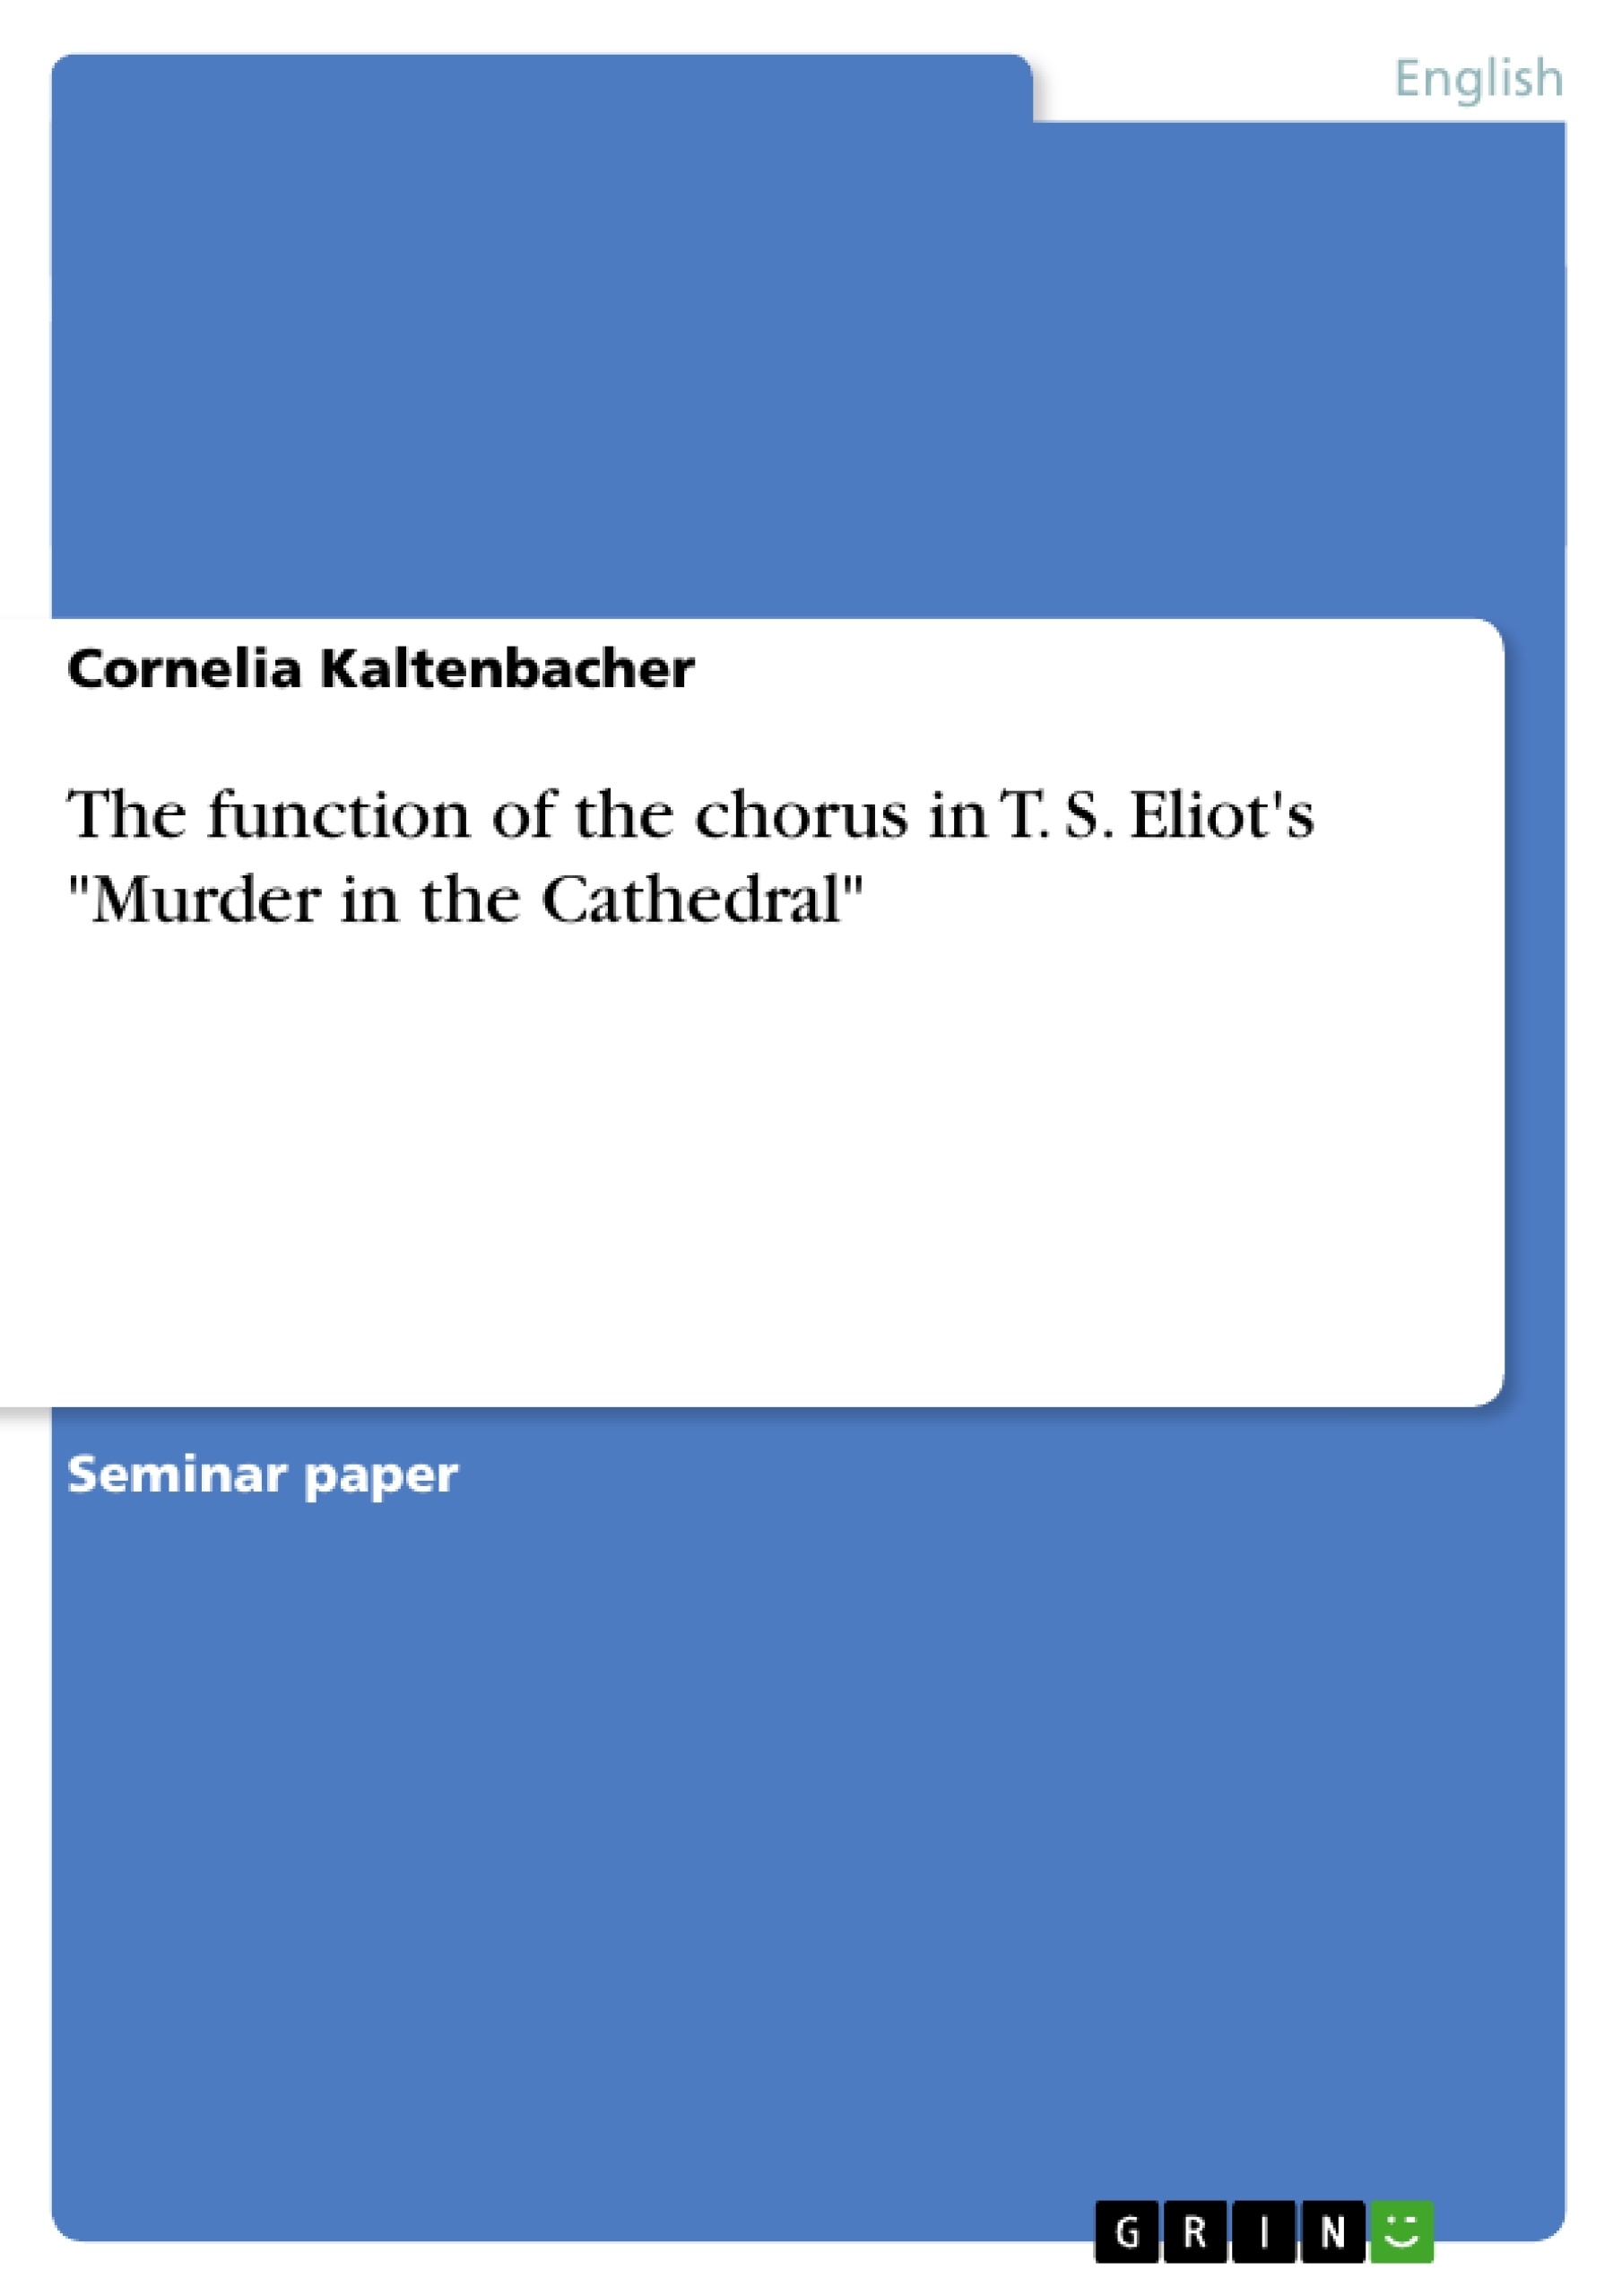 Título: The function of the chorus in T. S. Eliot's "Murder in the Cathedral"